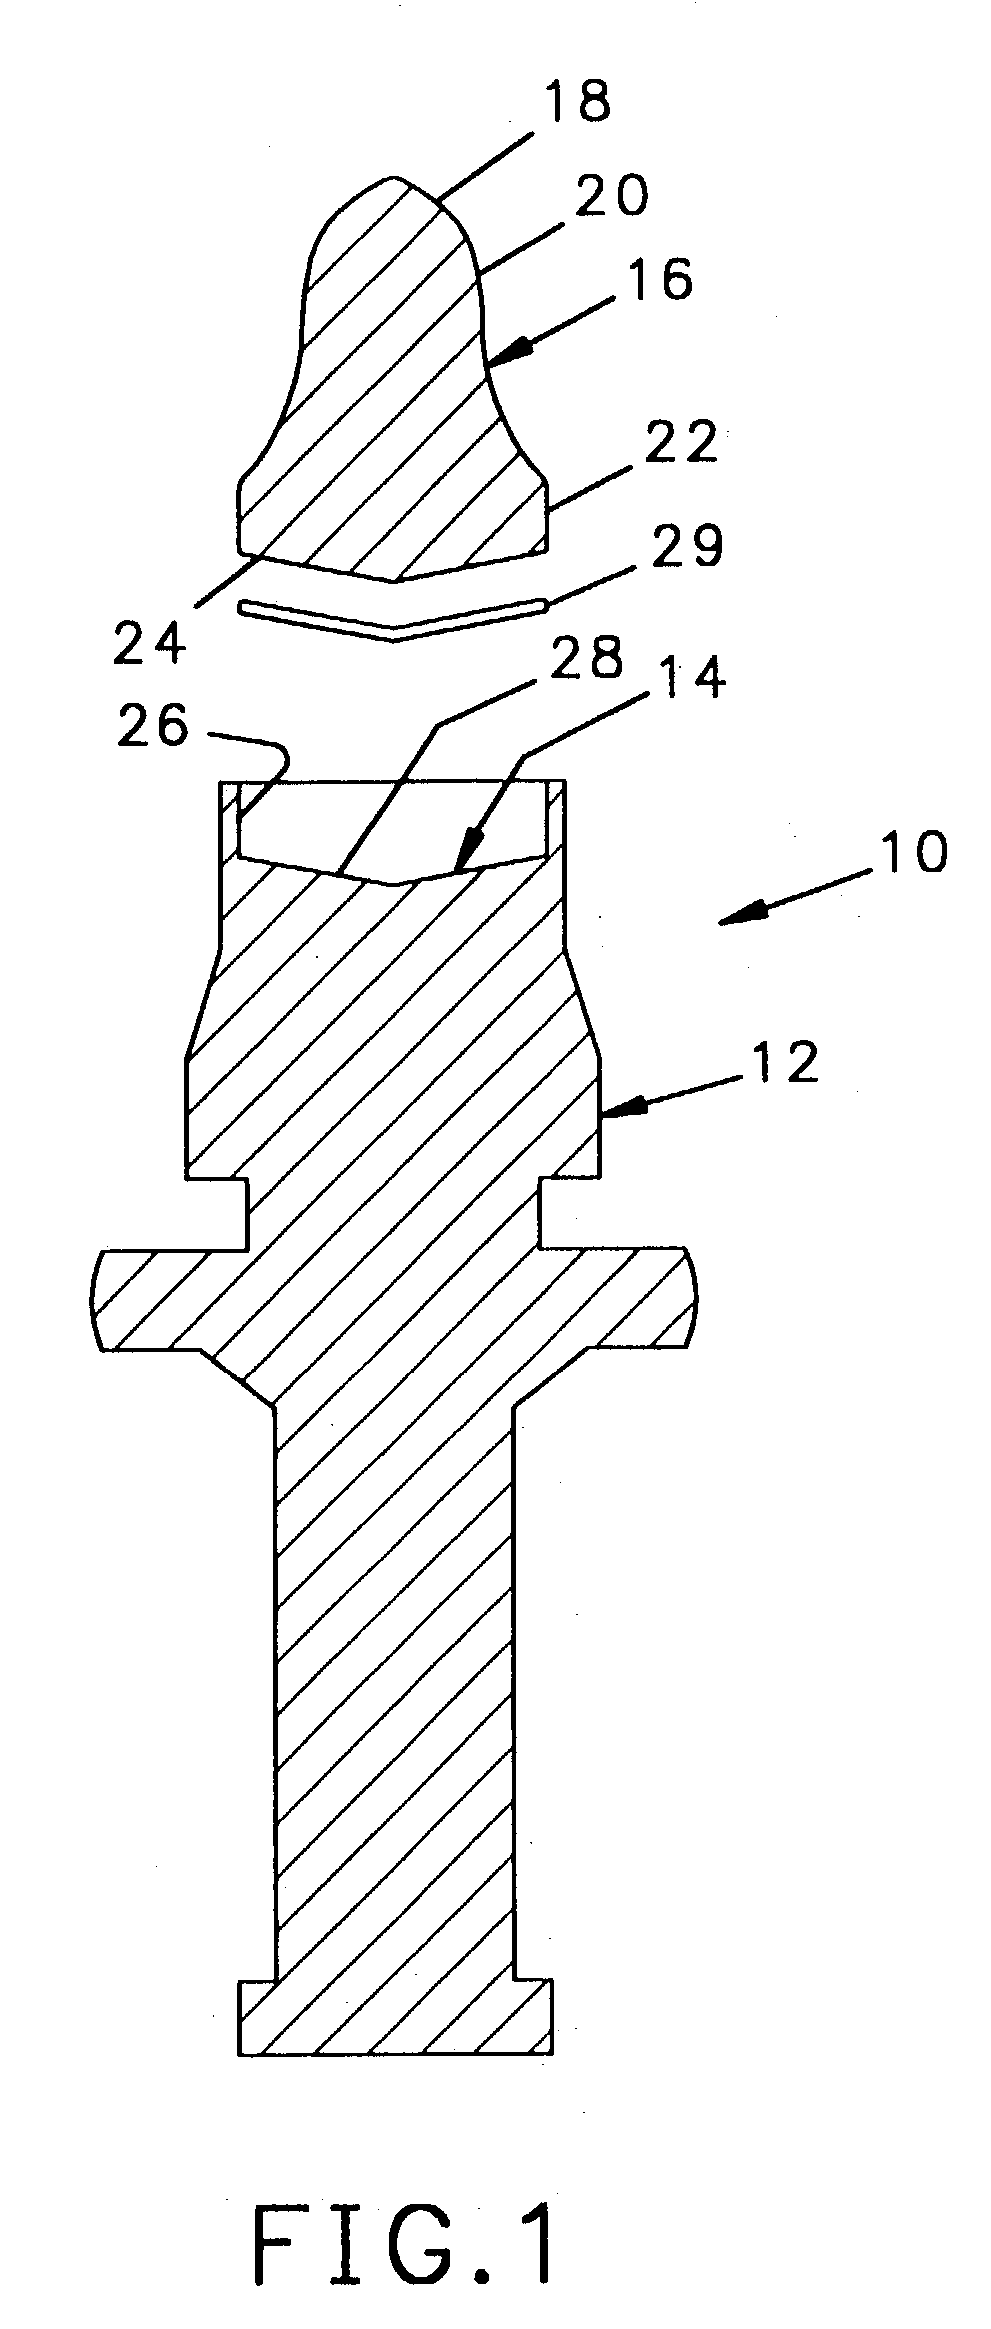 Cutting tool with hardened tip having a tapered base